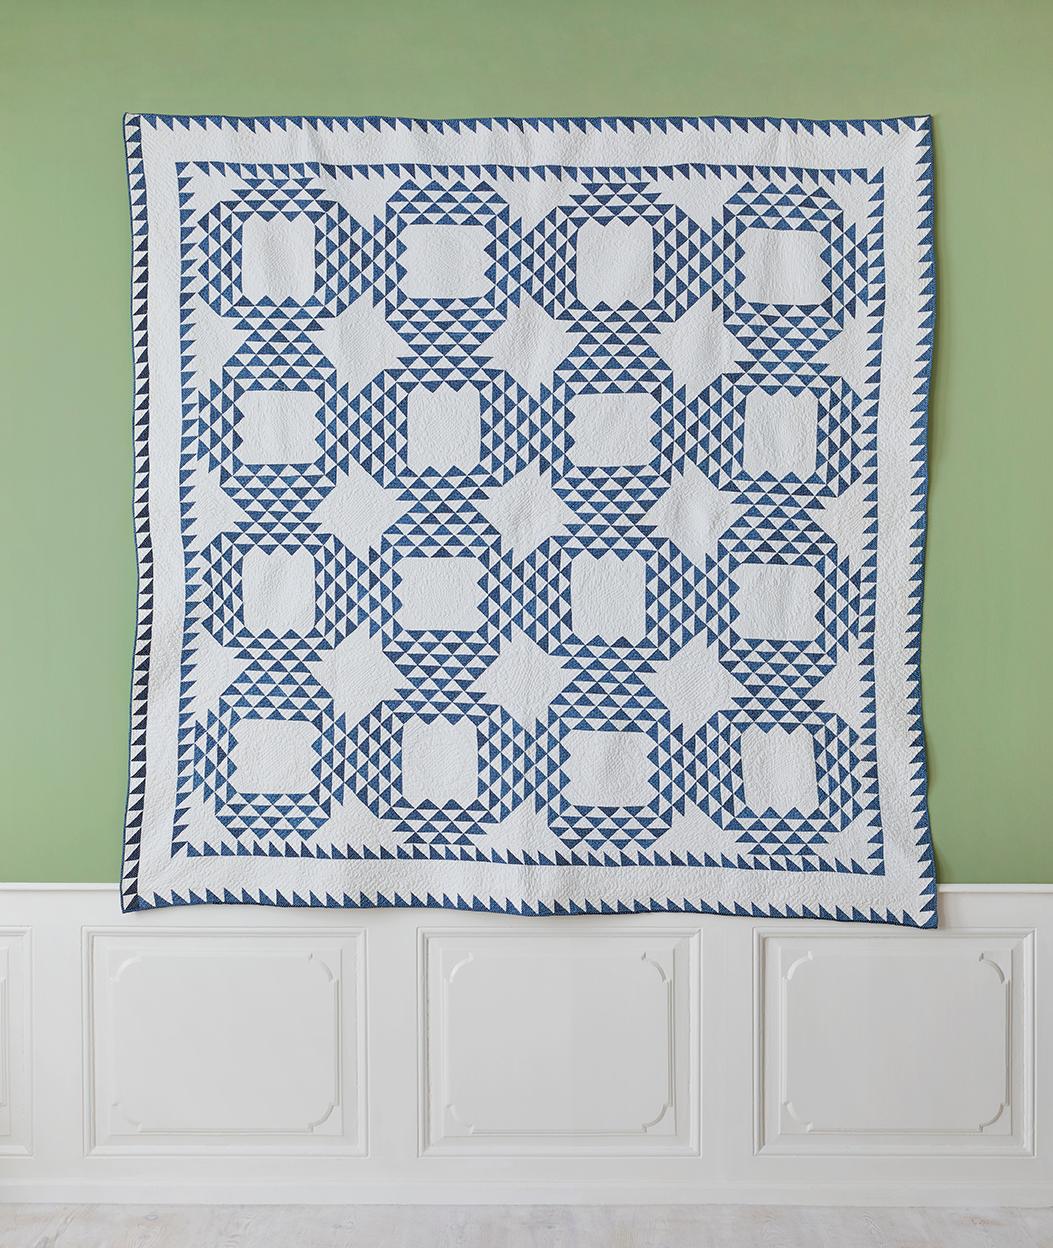 USA, late 19th century

“Ocean Waves” antique quilt.

Offered for sale is an exquisitely stitched variation of an Ocean Waves quilt done in indigo calico on a solid white ground. The white open fields are finely quilted with wreaths. The outer